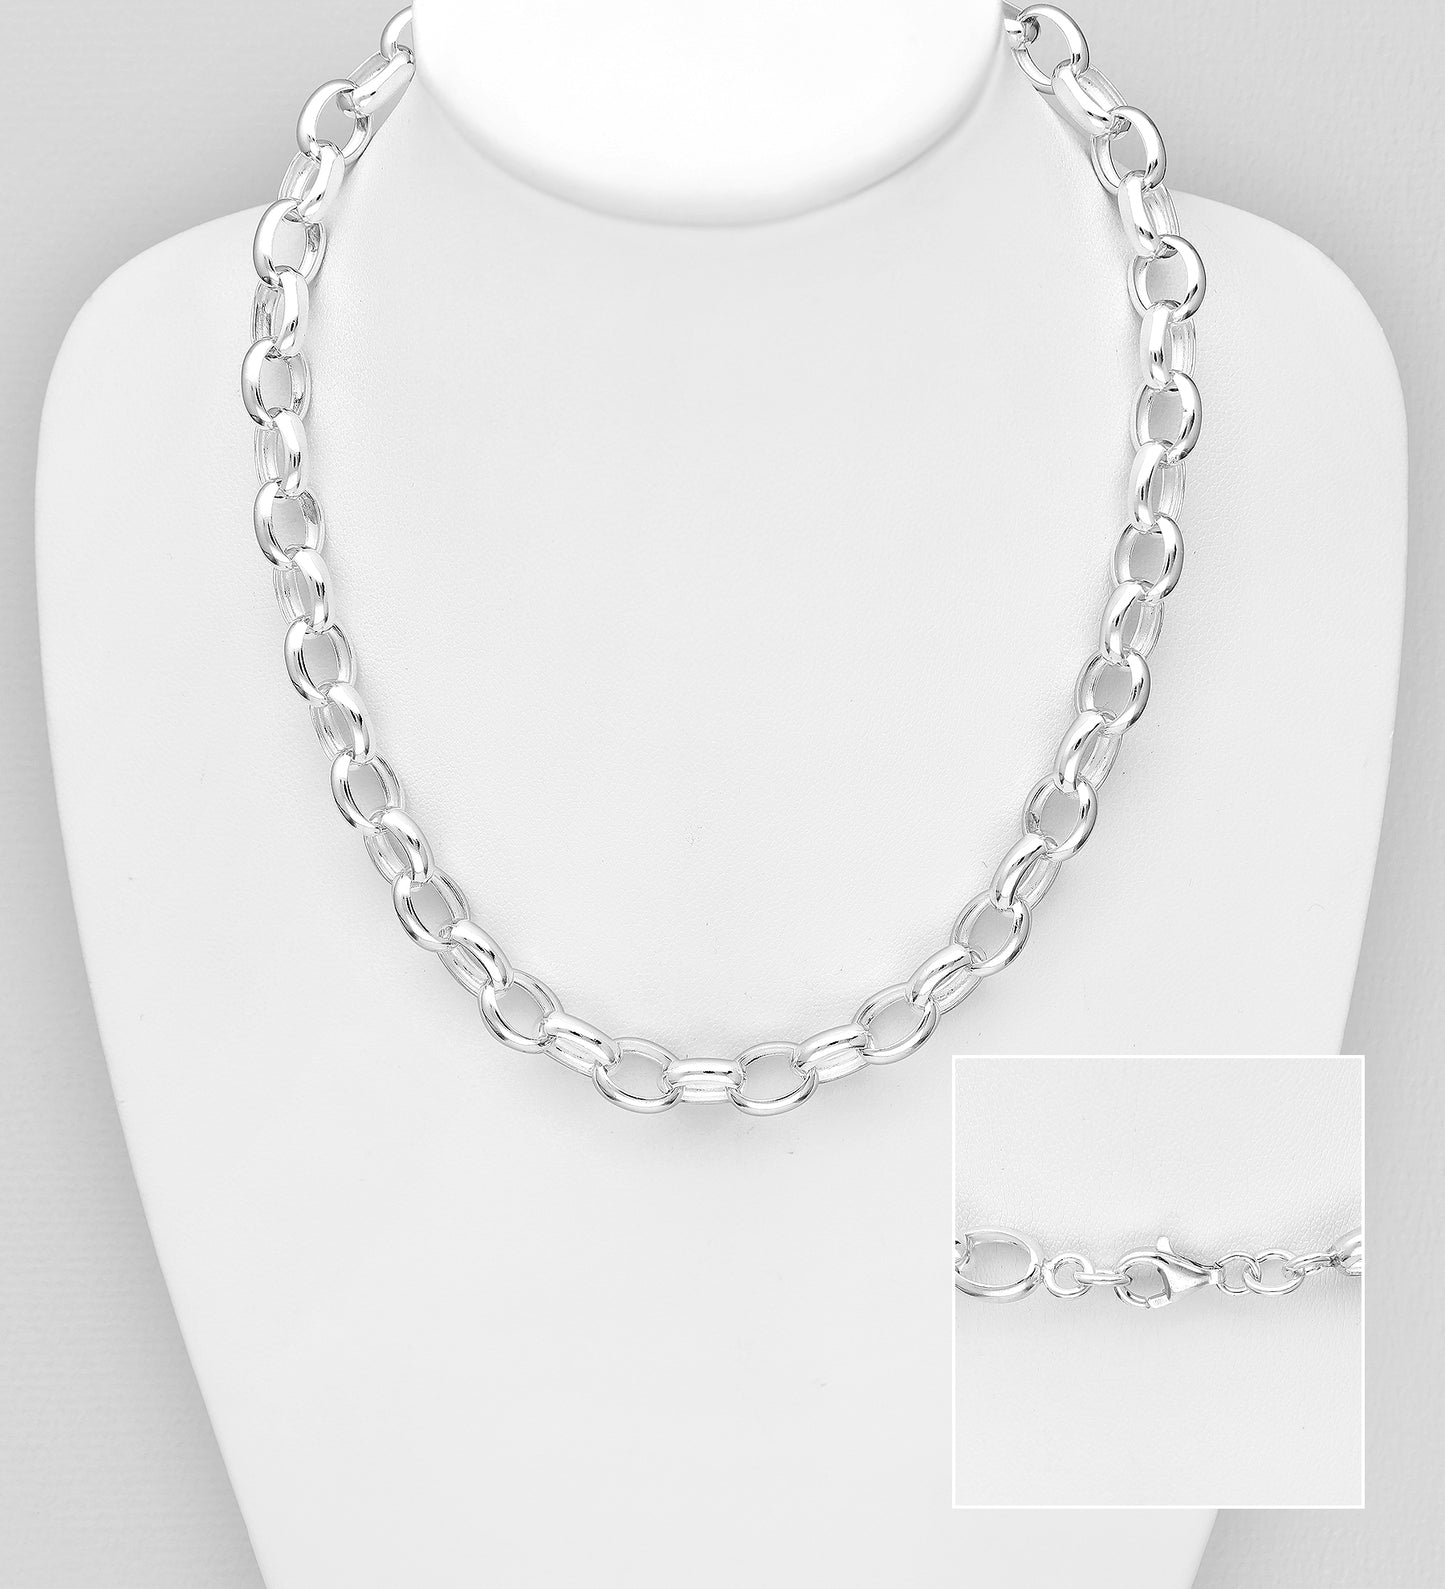 Heavy Duty Sterling Silver Chain Link Necklace